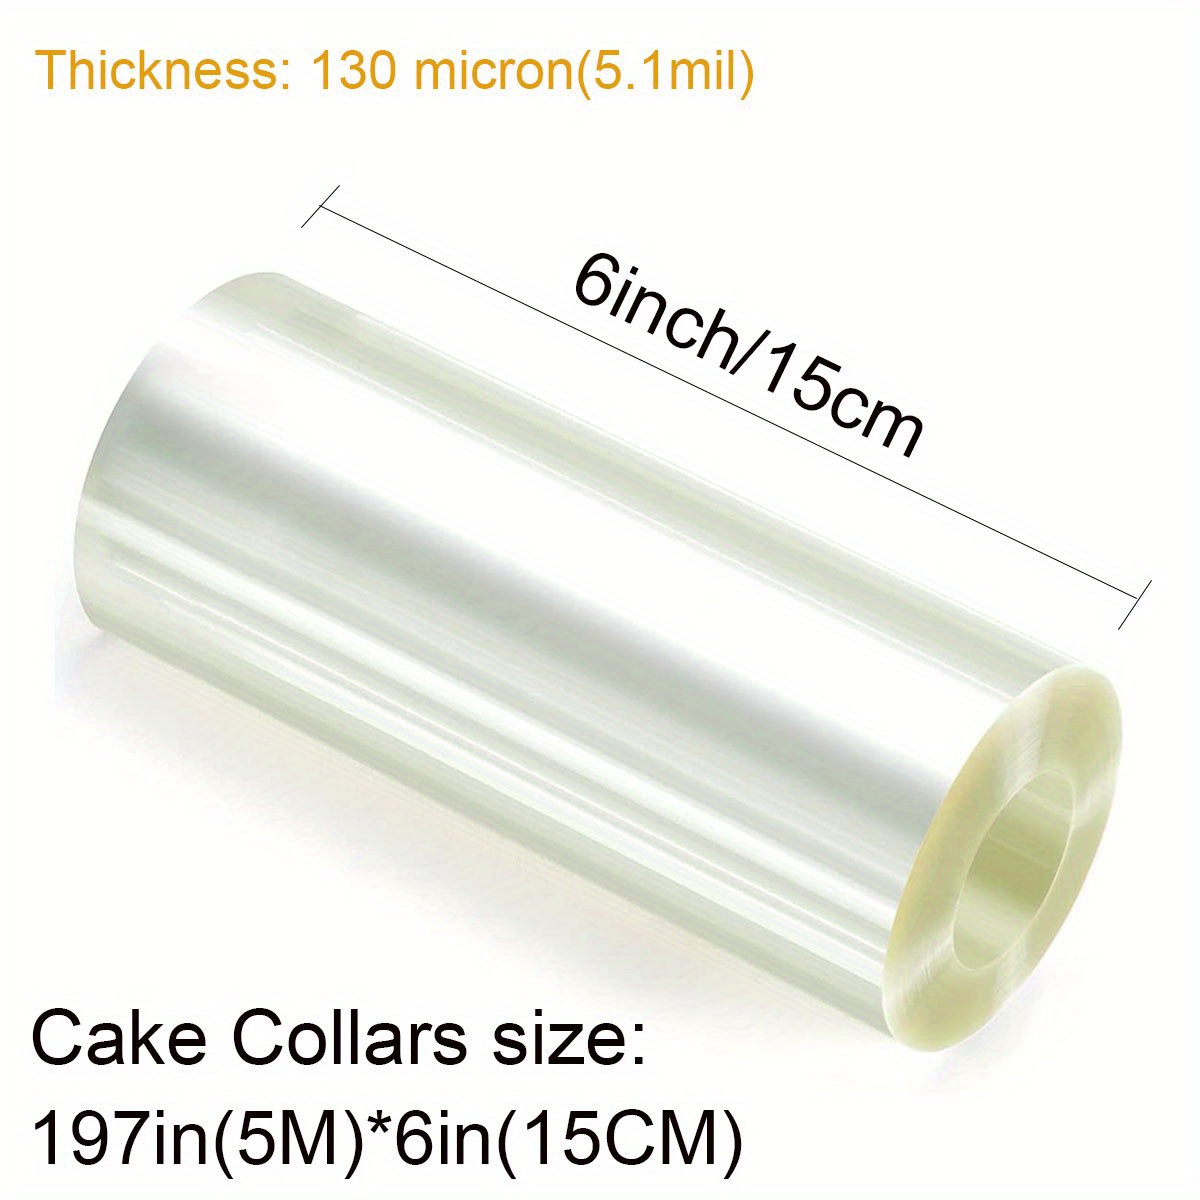 Proshopping 8 x 394 Cake Collars, 125 Micron Thick Clear Acetate Rolls, Transparent Acetate Sheets, Mousse Chocolate Collar, Plastic Cake